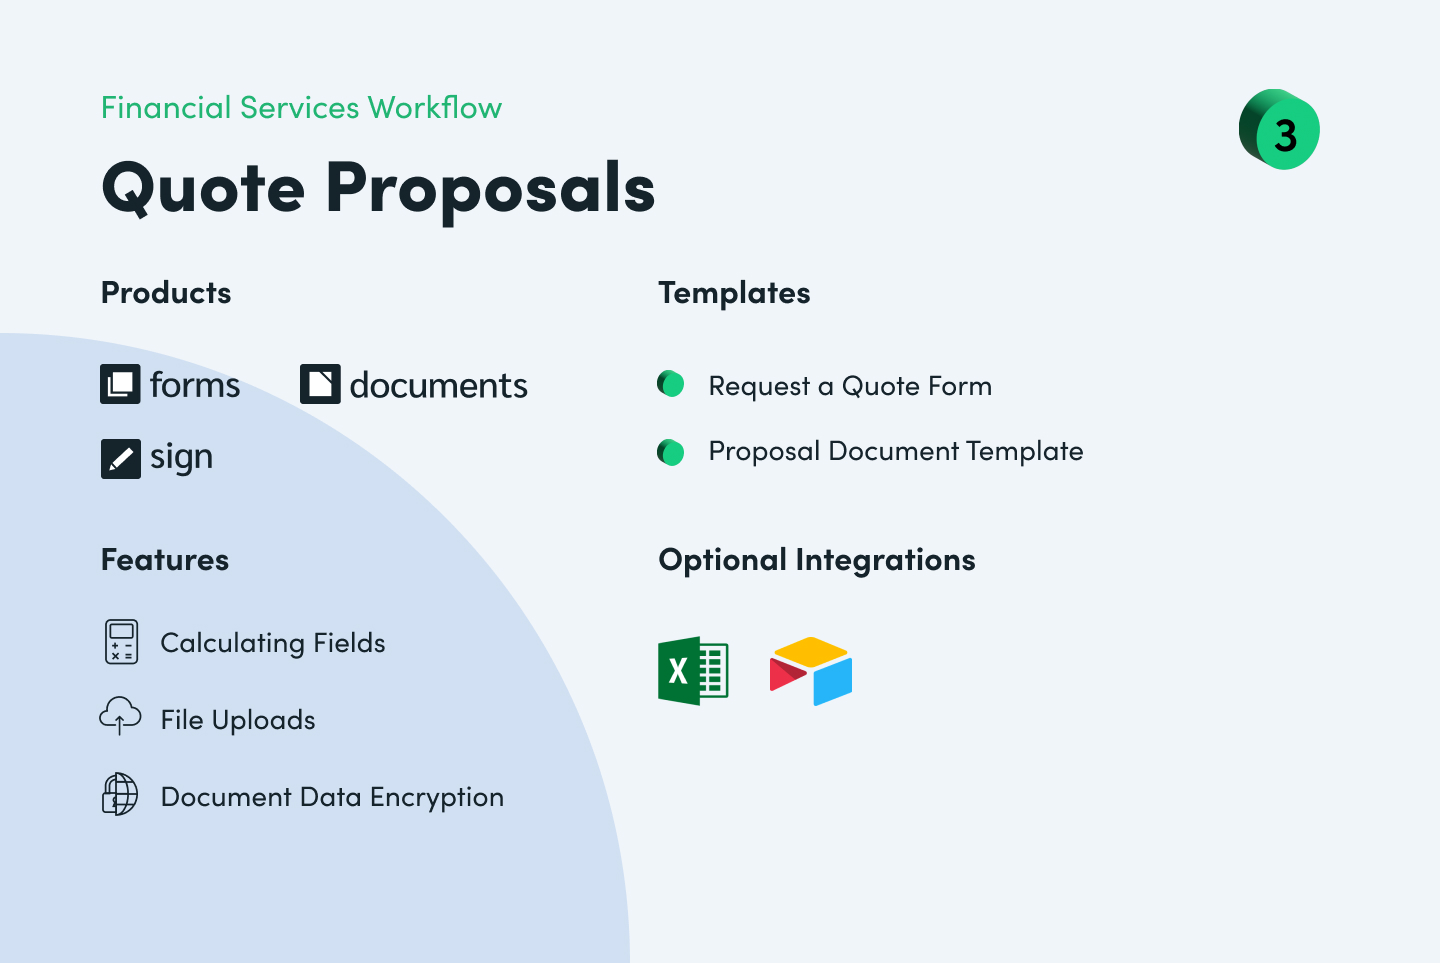 Financial Services Quote Proposal Workflow Example